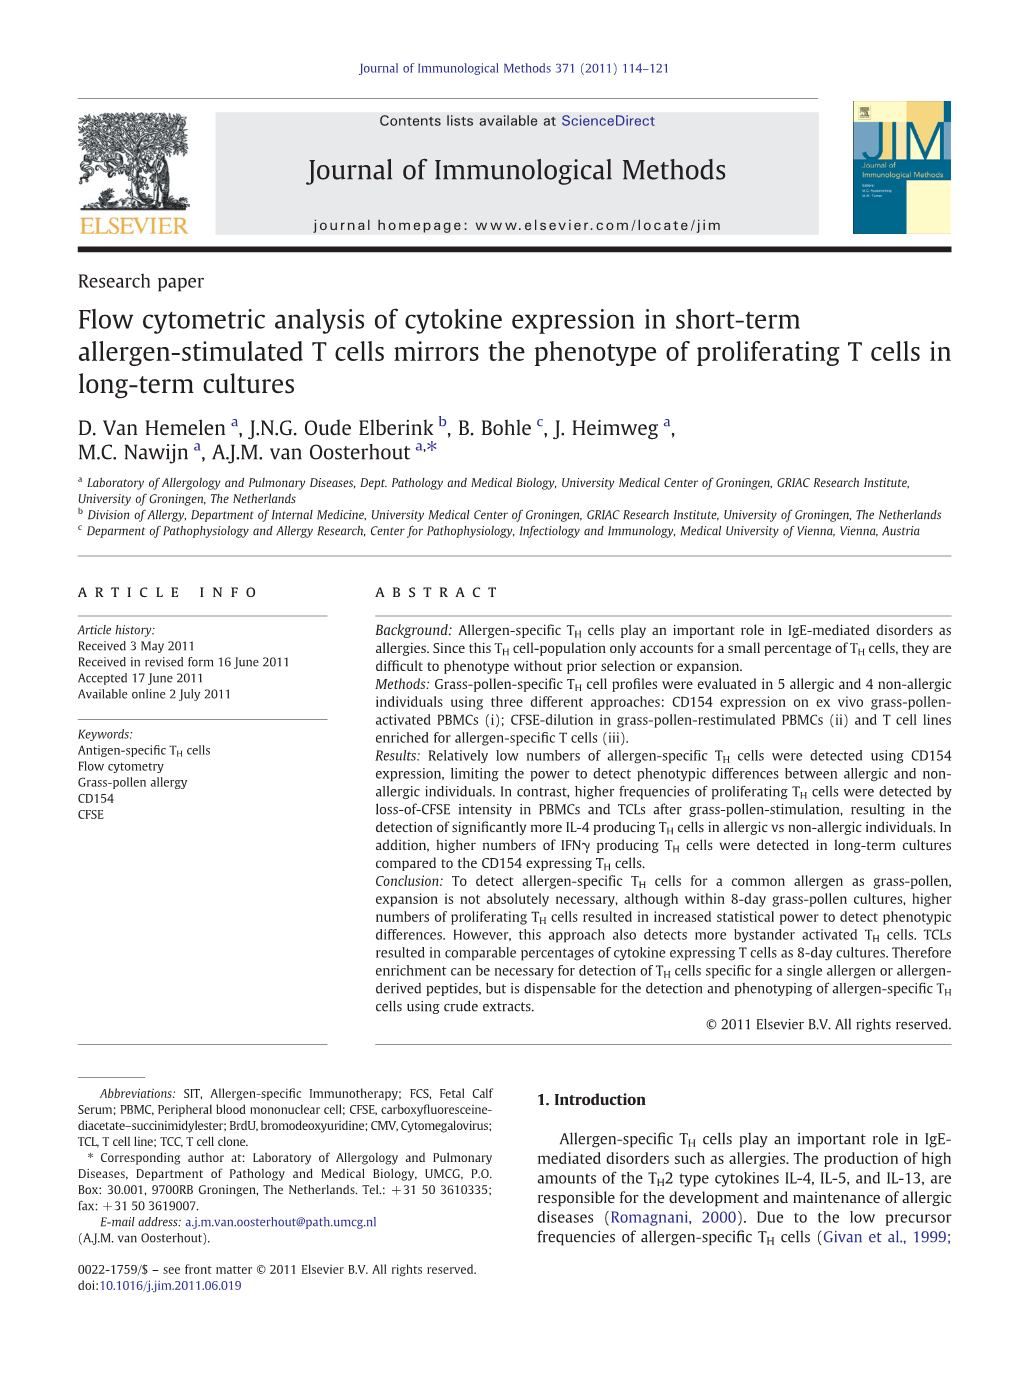 Flow Cytometric Analysis of Cytokine Expression in Short-Term Allergen-Stimulated T Cells Mirrors the Phenotype of Proliferating T Cells in Long-Term Cultures